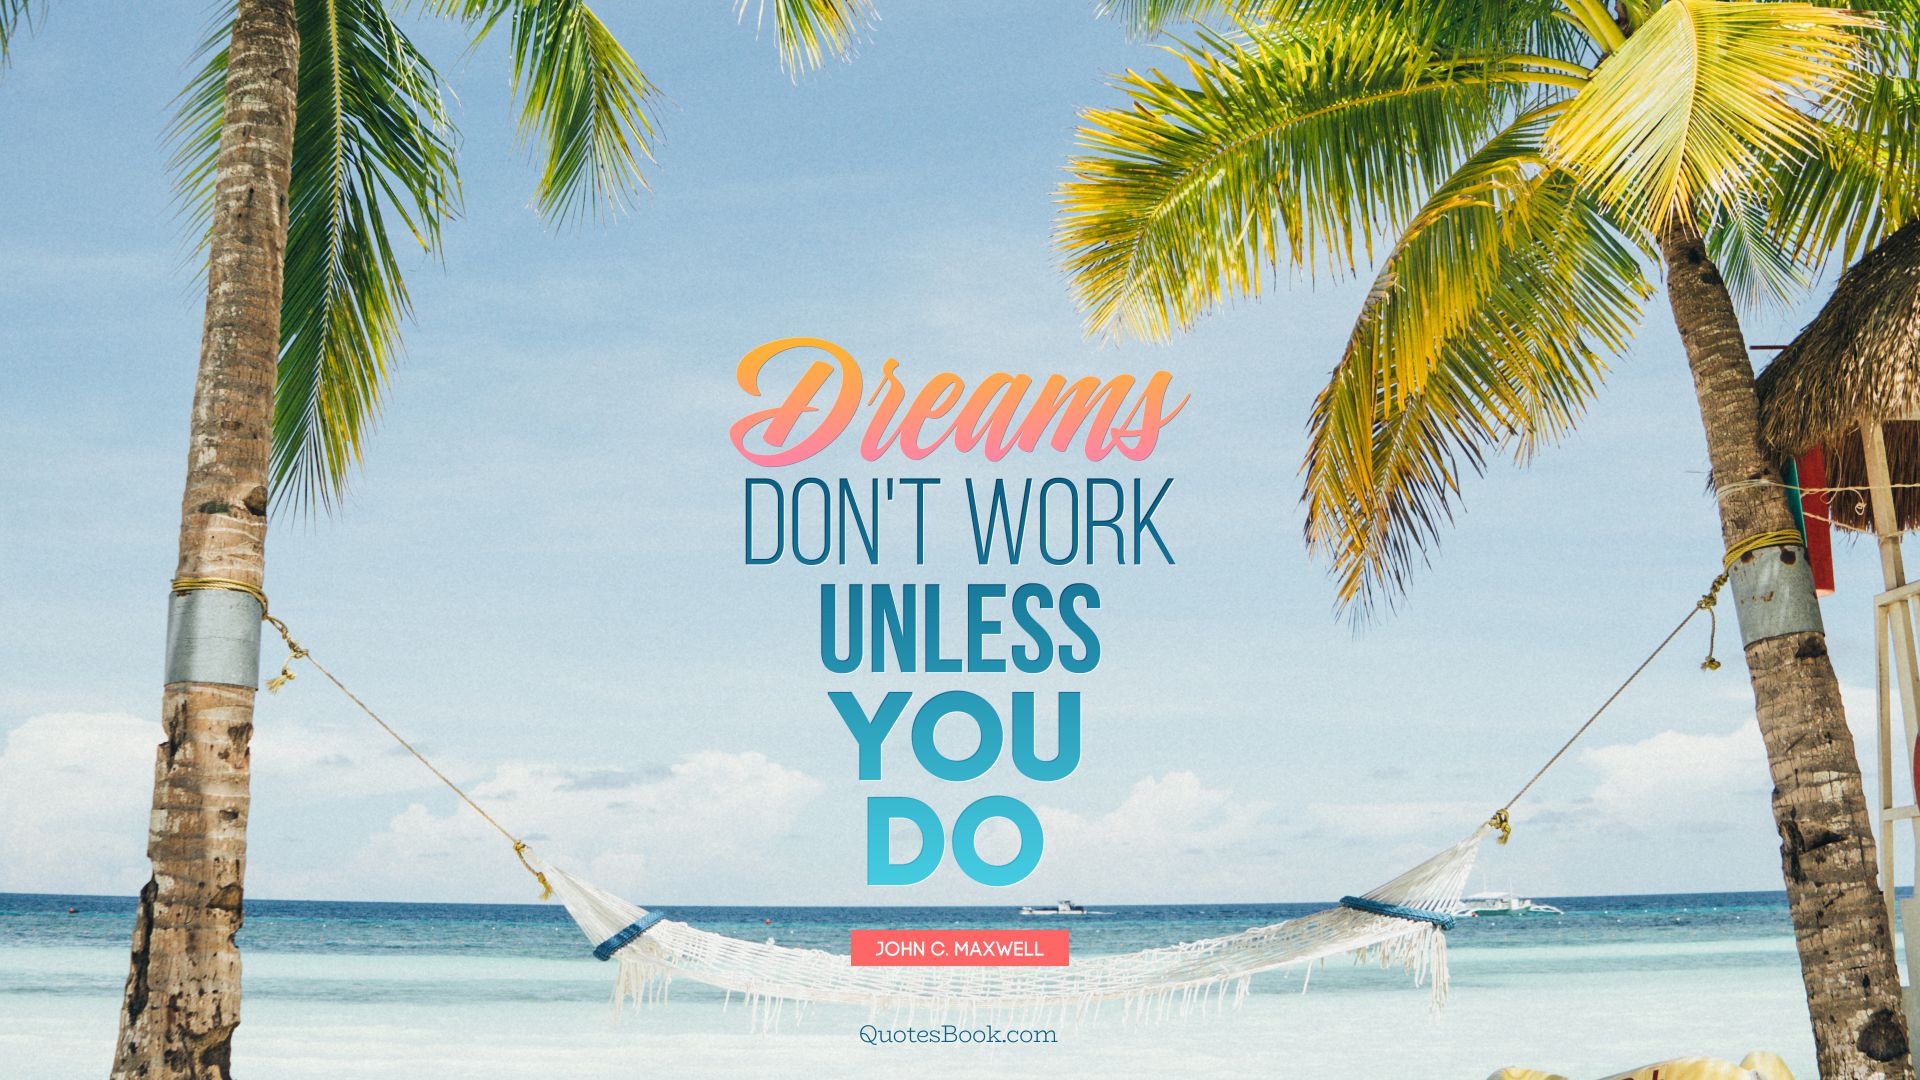 Dreams don't work unless you do. - Quote by John C. Maxwell